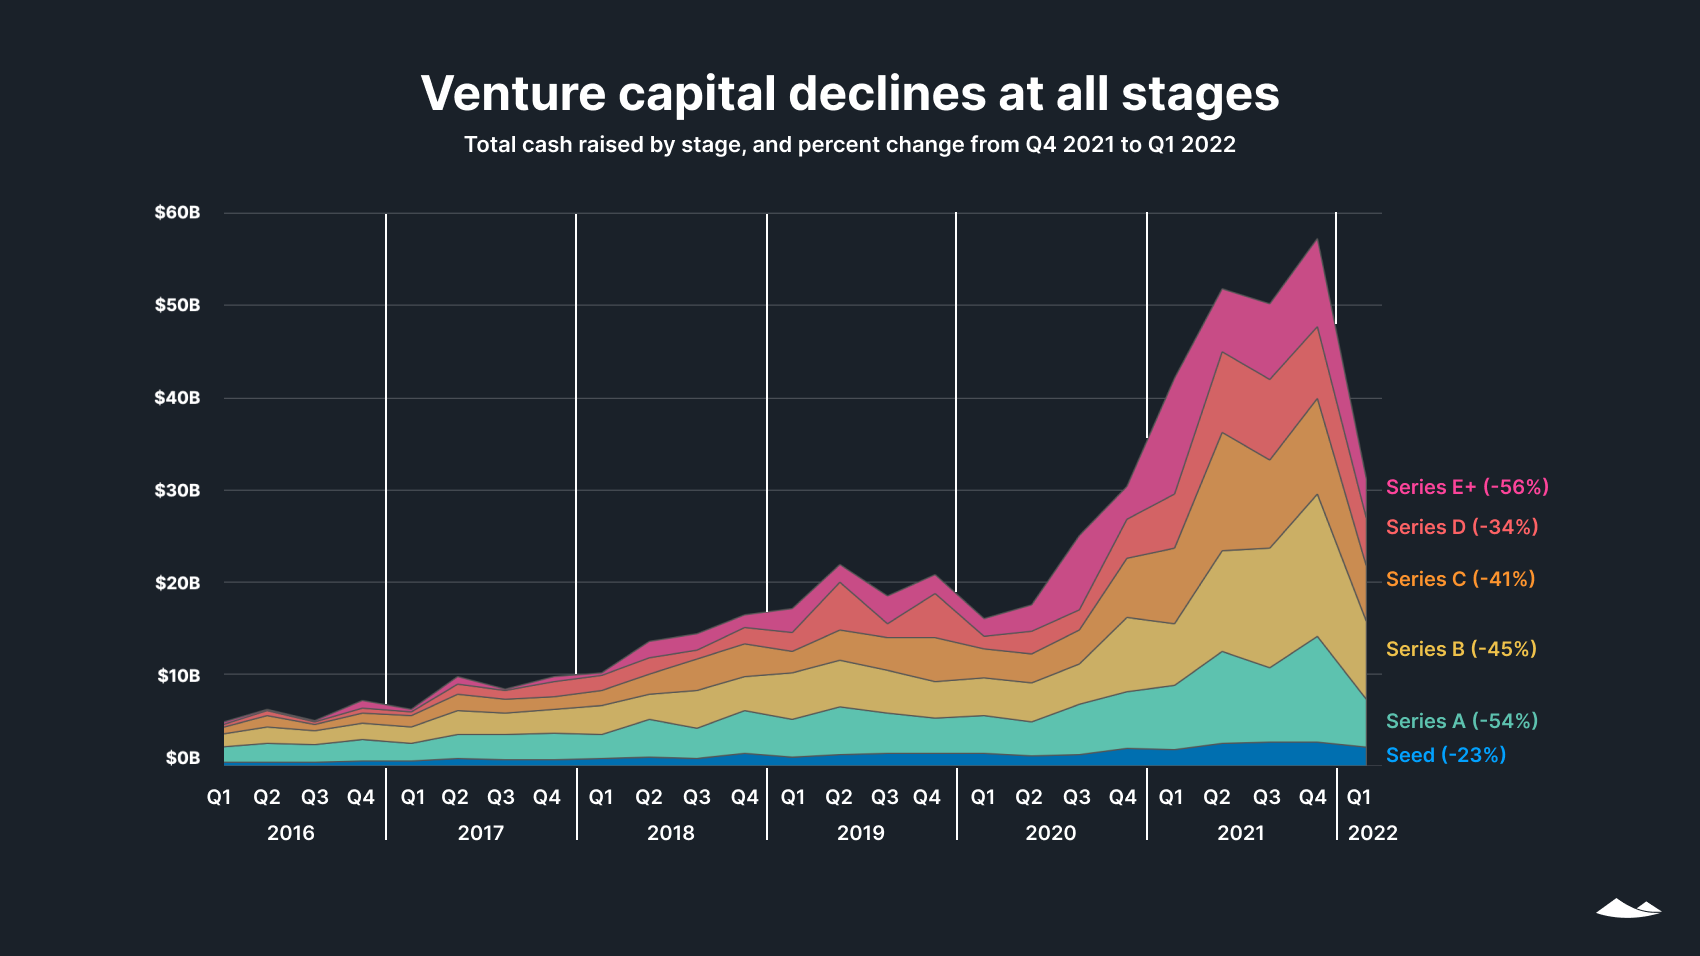 Area chart shows significant declines in venture capital funding raised at all stages from seed through Series E and beyond after a peak in Q1 2022.